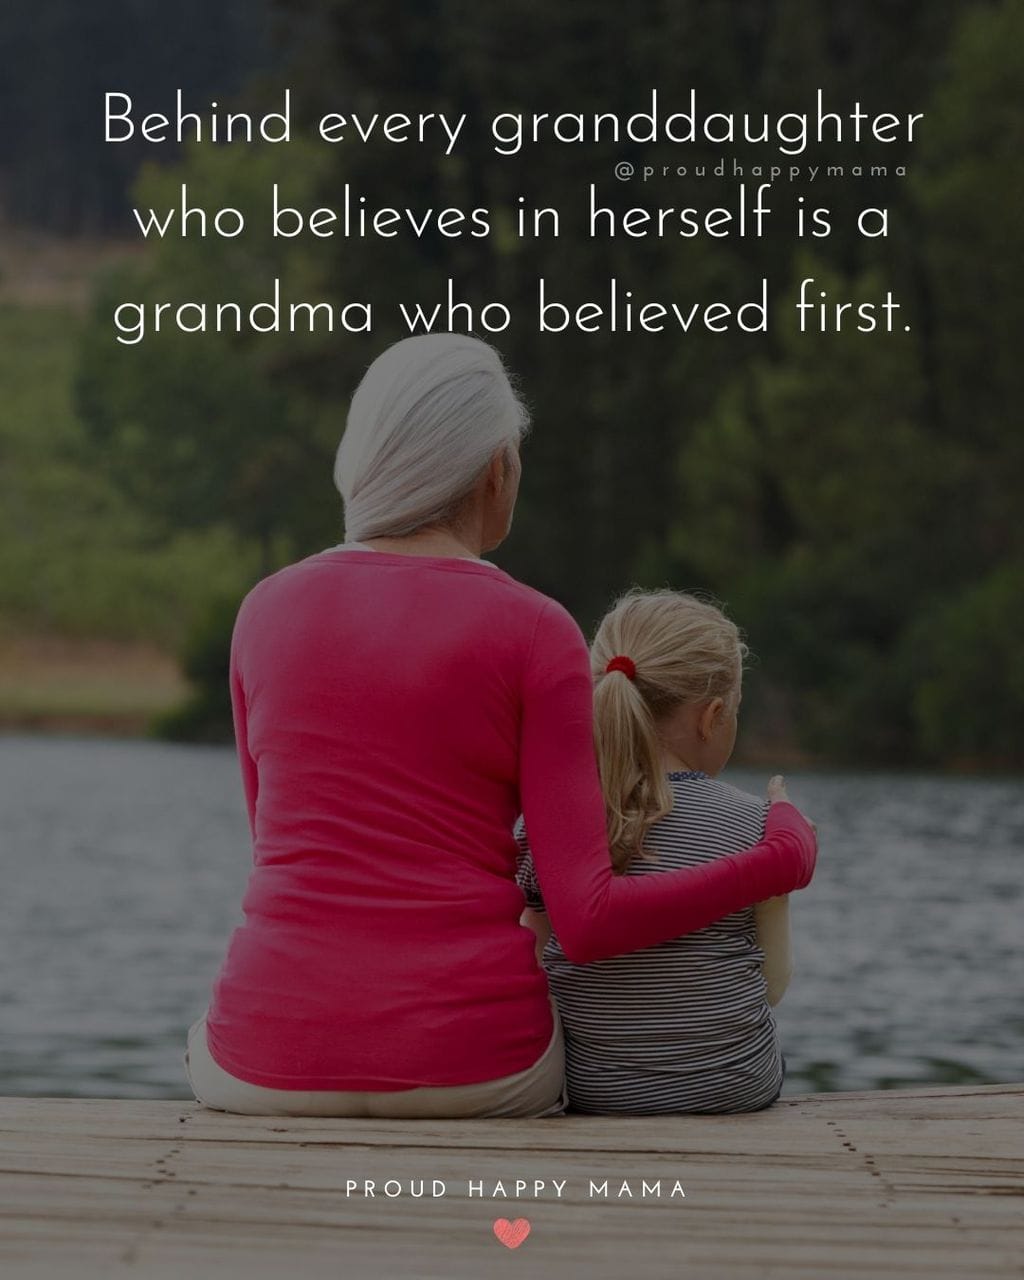 Granddaughter Quotes - Behind every granddaughter who believes in herself is a grandma who believed first.